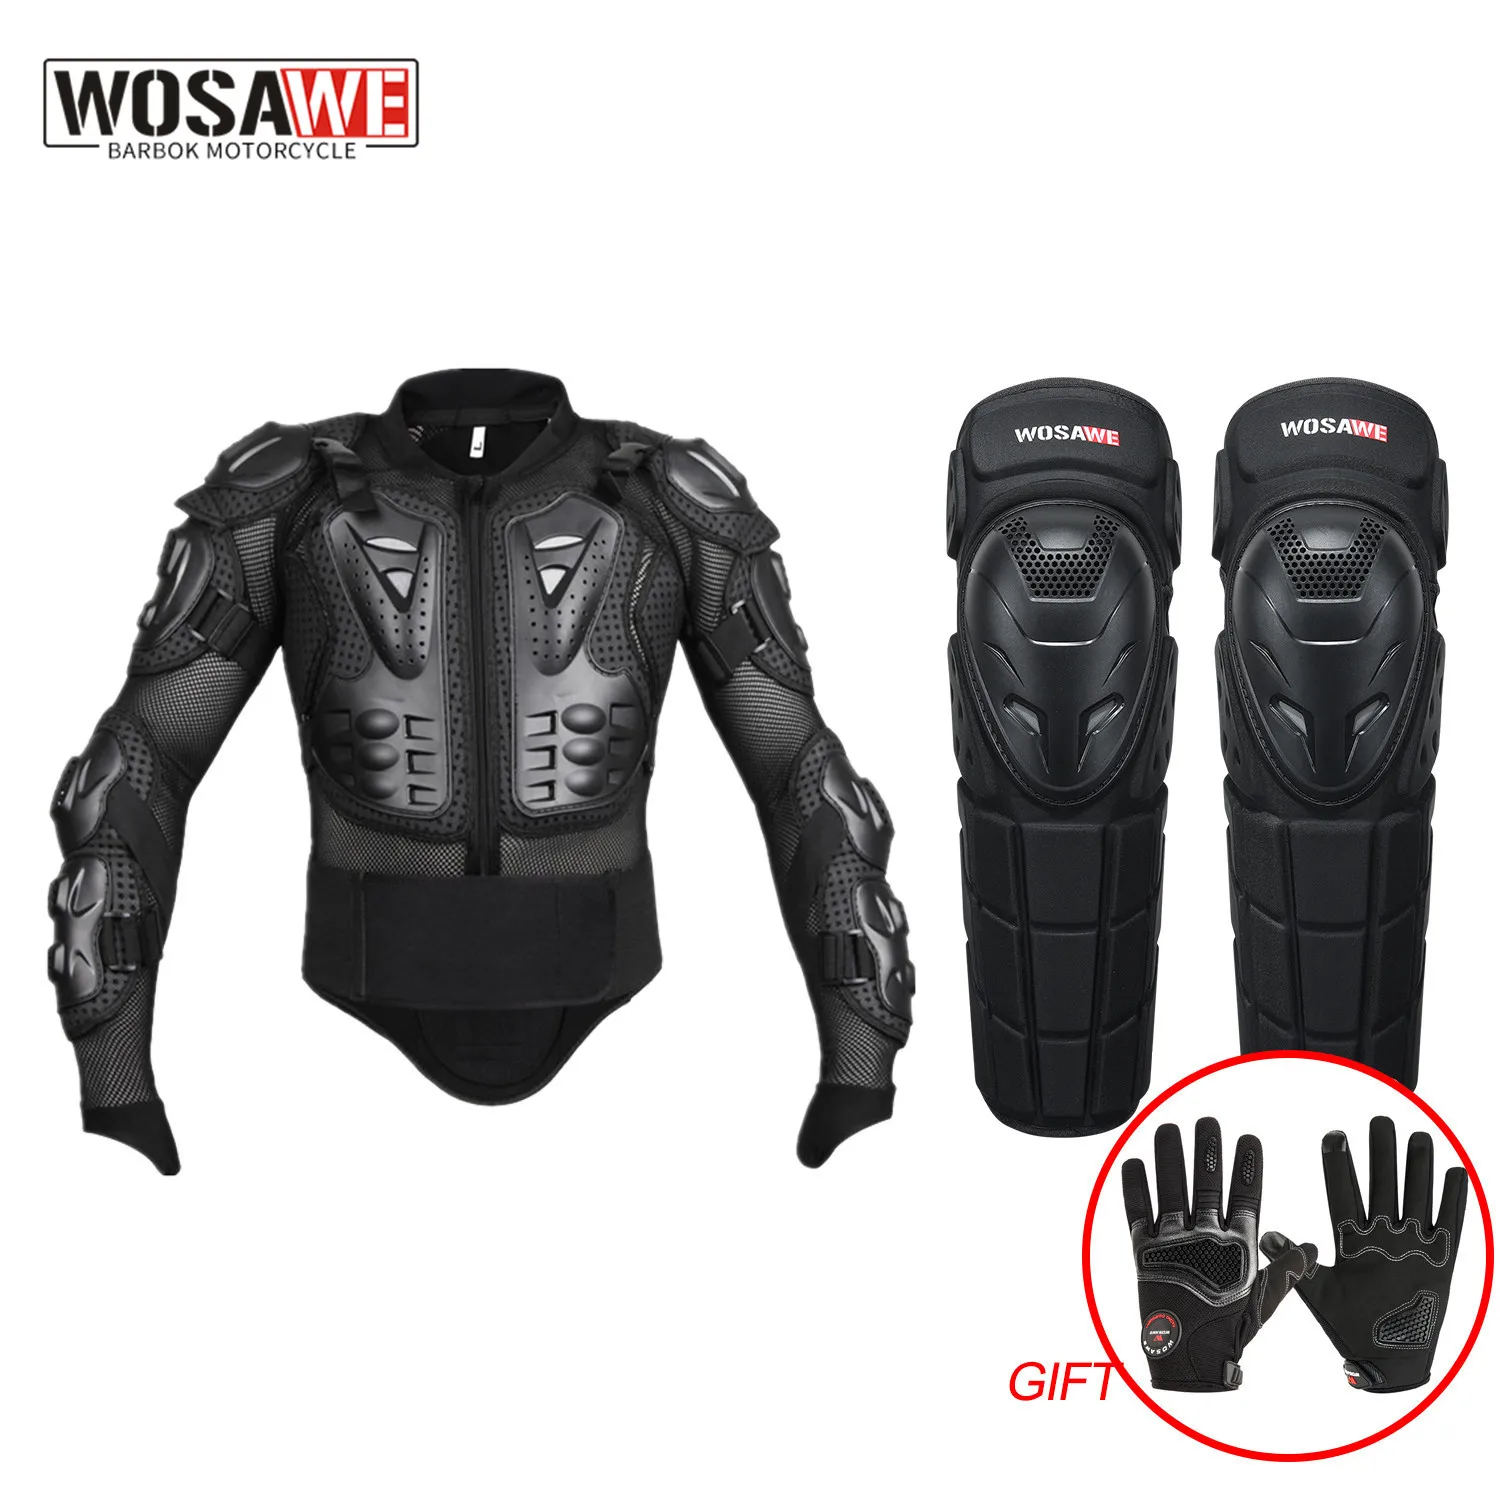 WOSAWE NEW Motorcycle Jacket Men Full Body Protection Armor Motocross Racing Moto Jackets Riding Motorbike Accessories